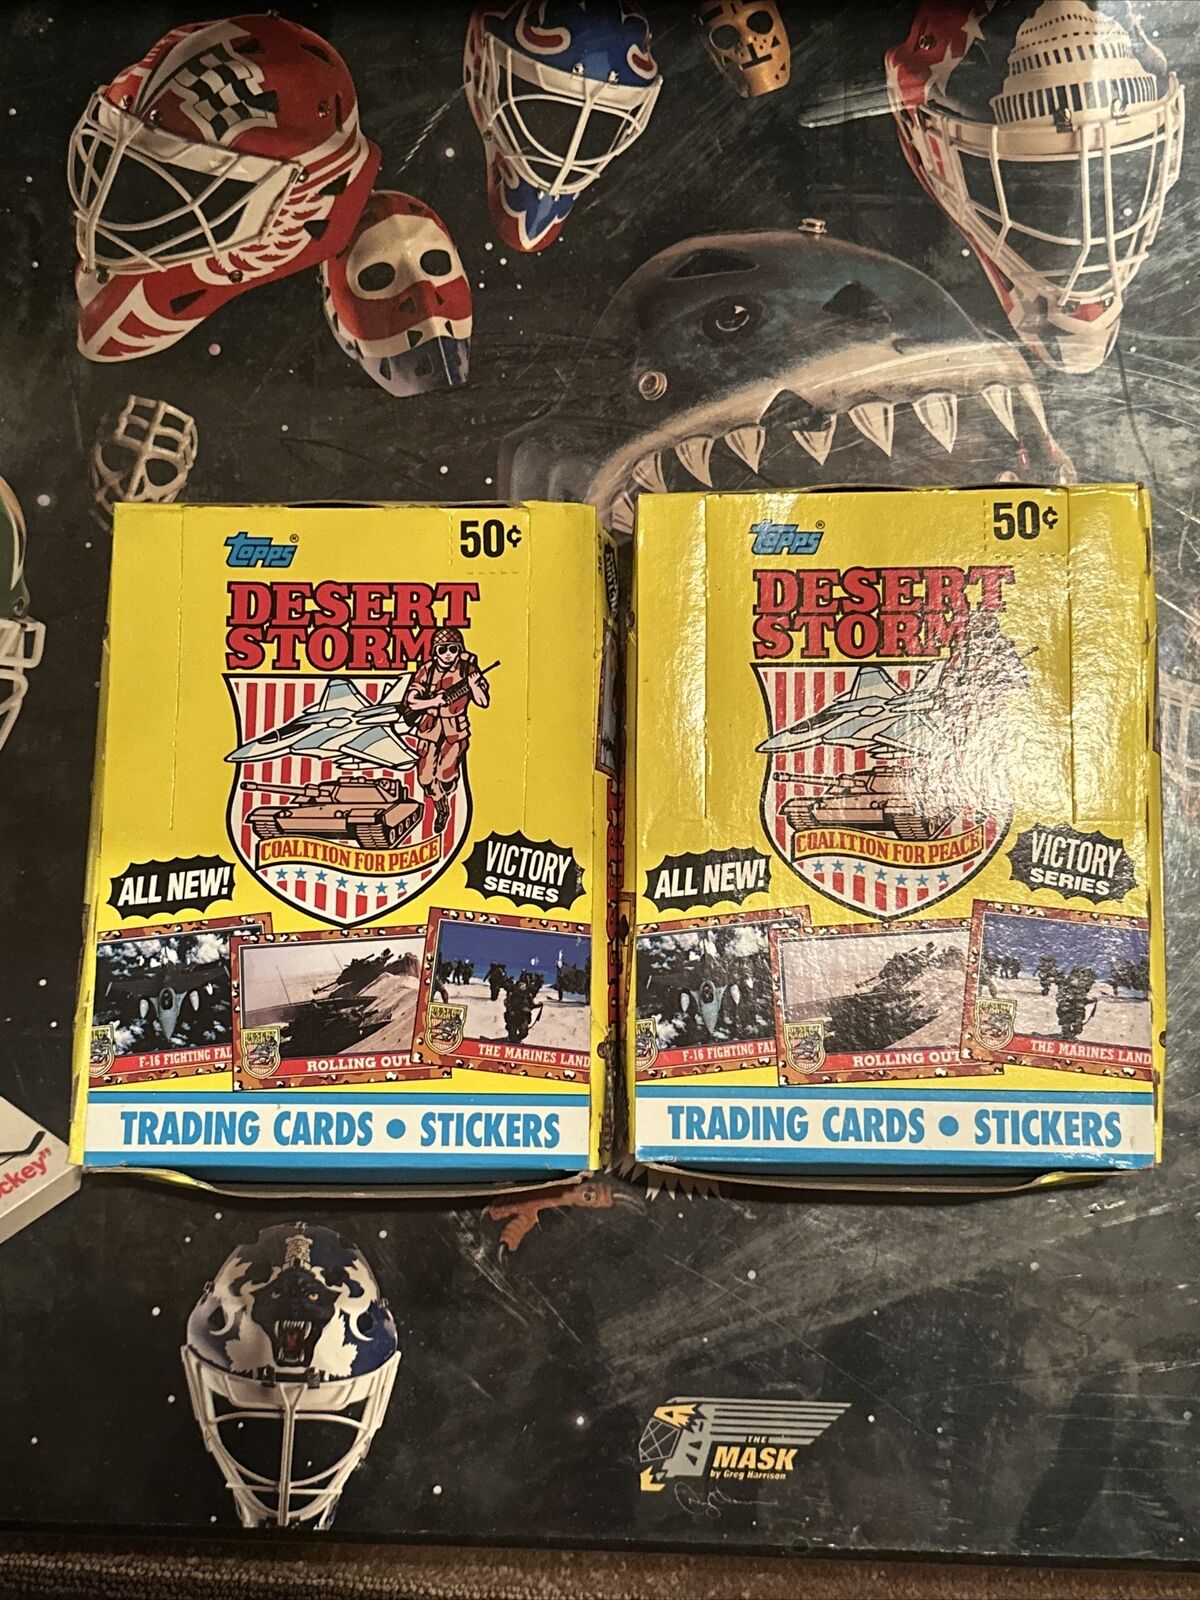 1991 TOPPS DESERT STORM Victory Series 2 Boxes With 72 Fresh Wax Packs